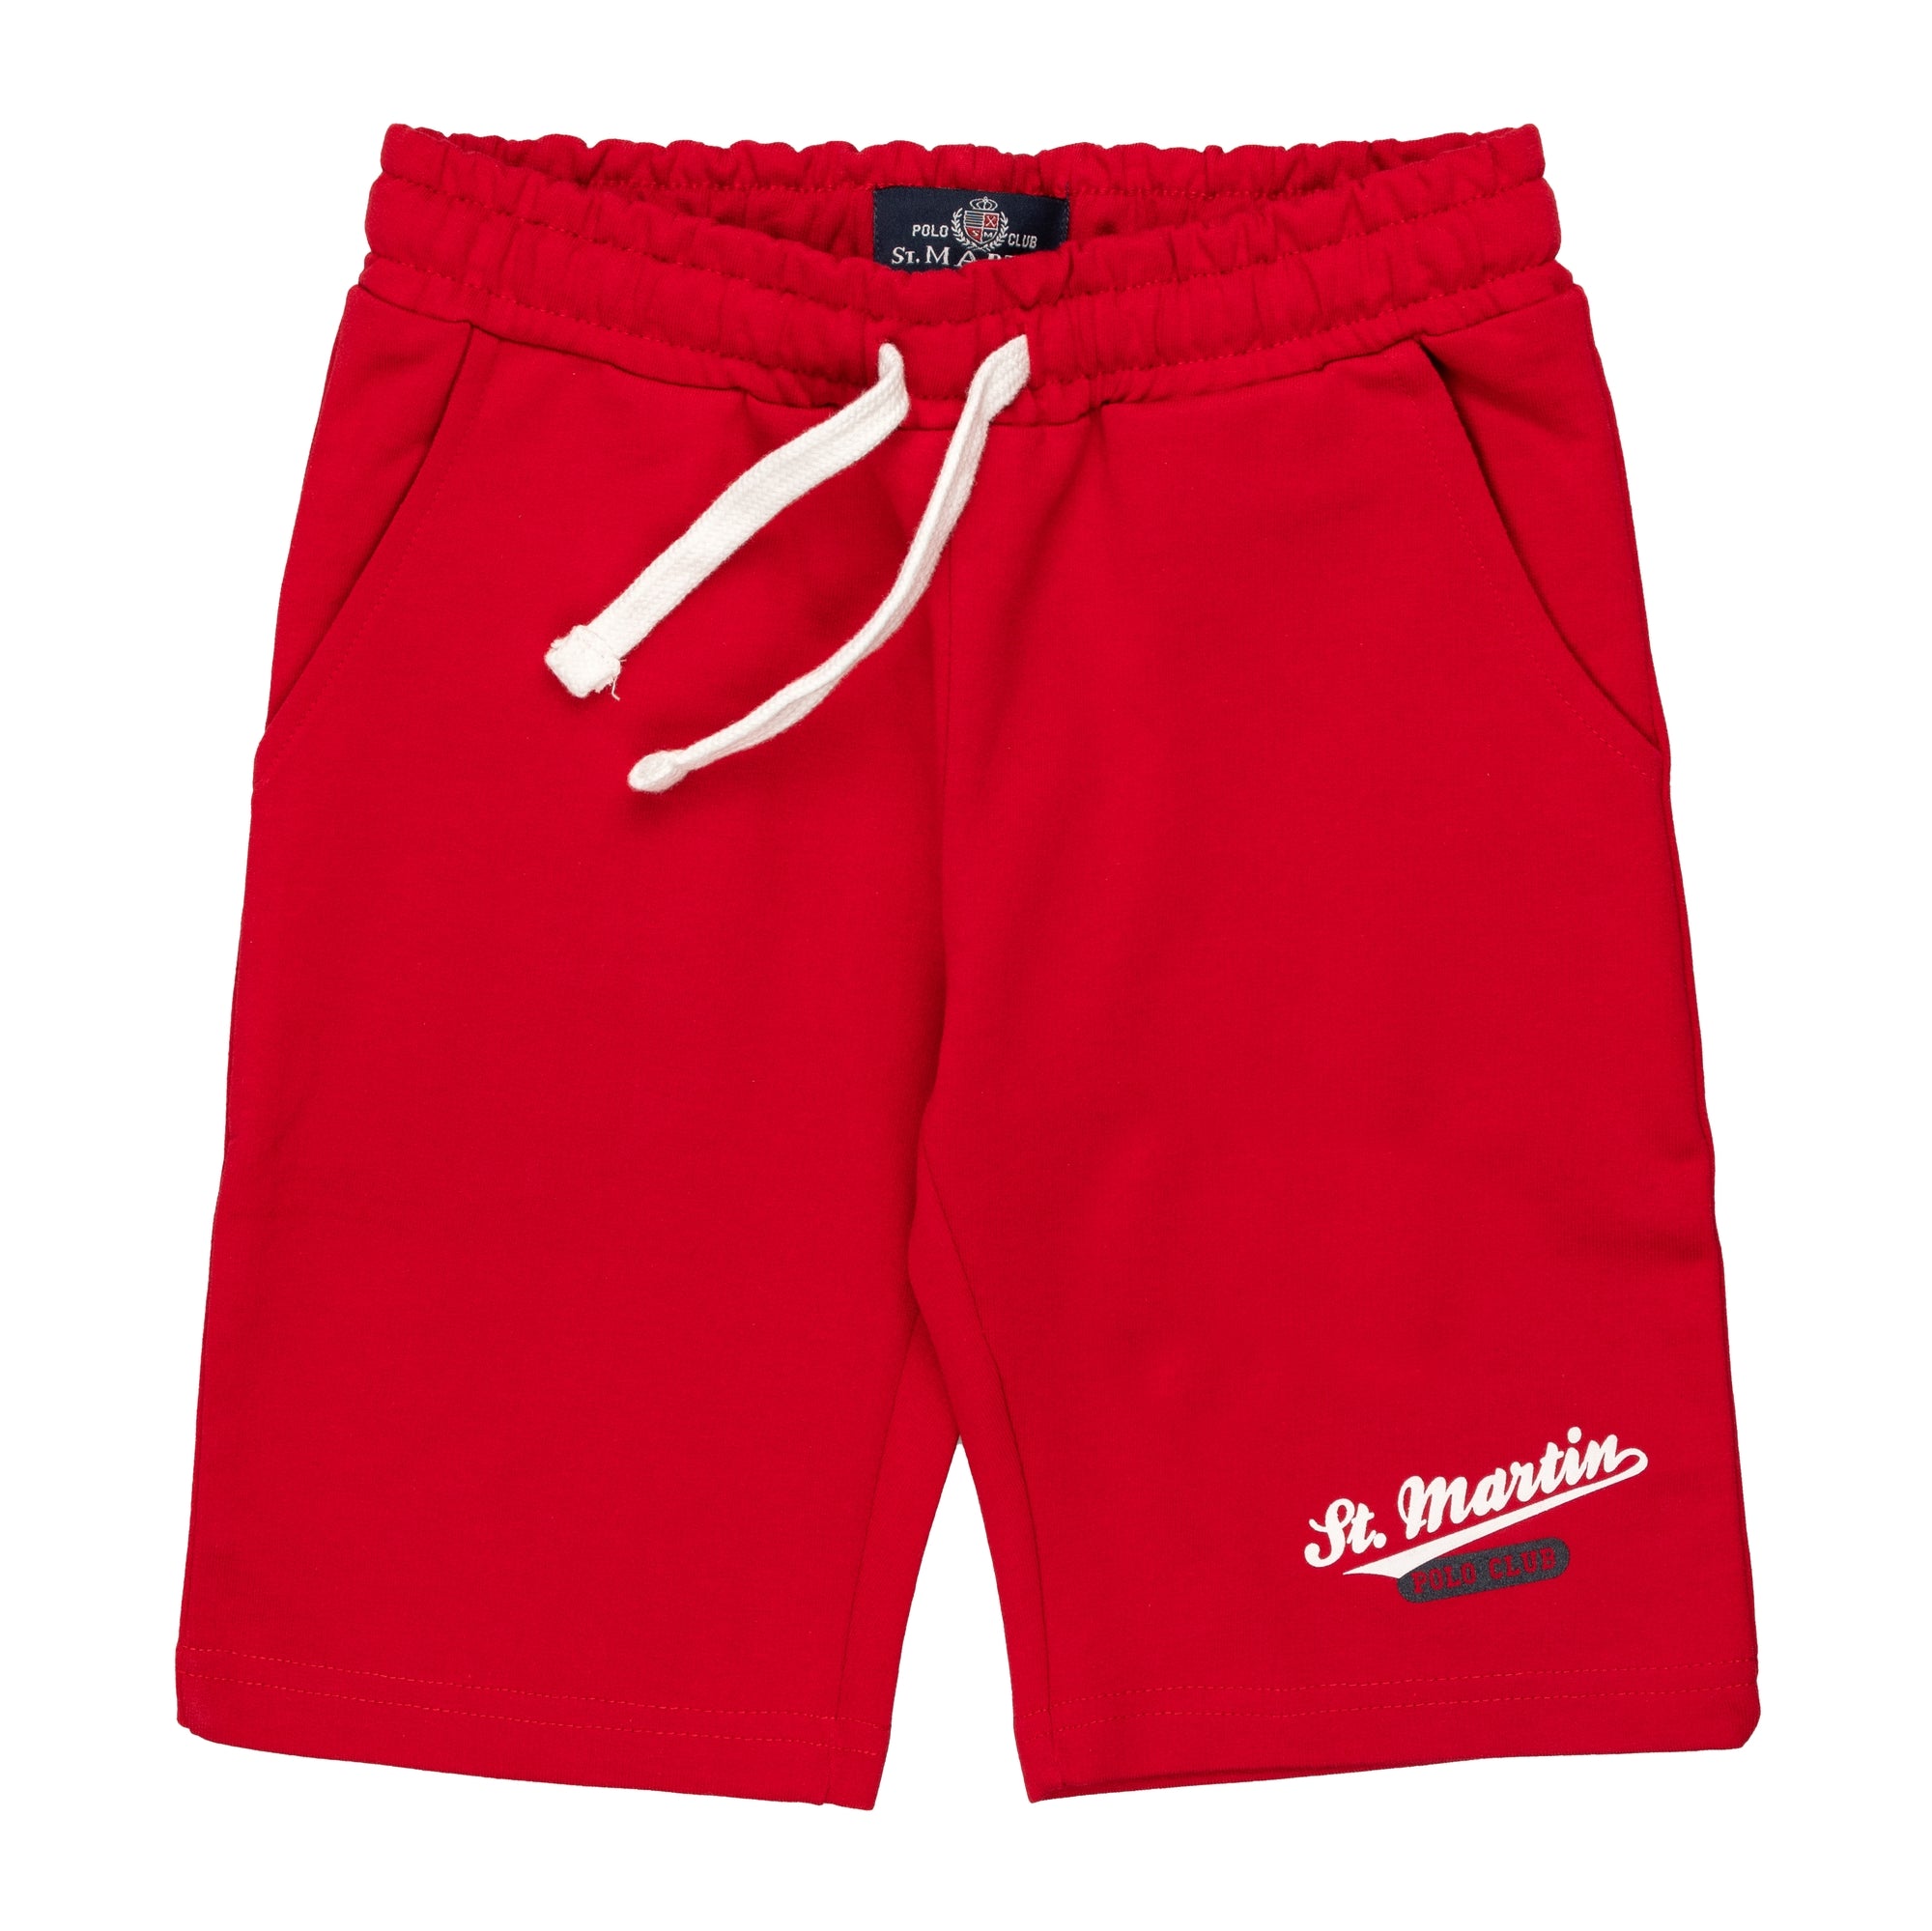 French terry Bermuda shorts with front logo print